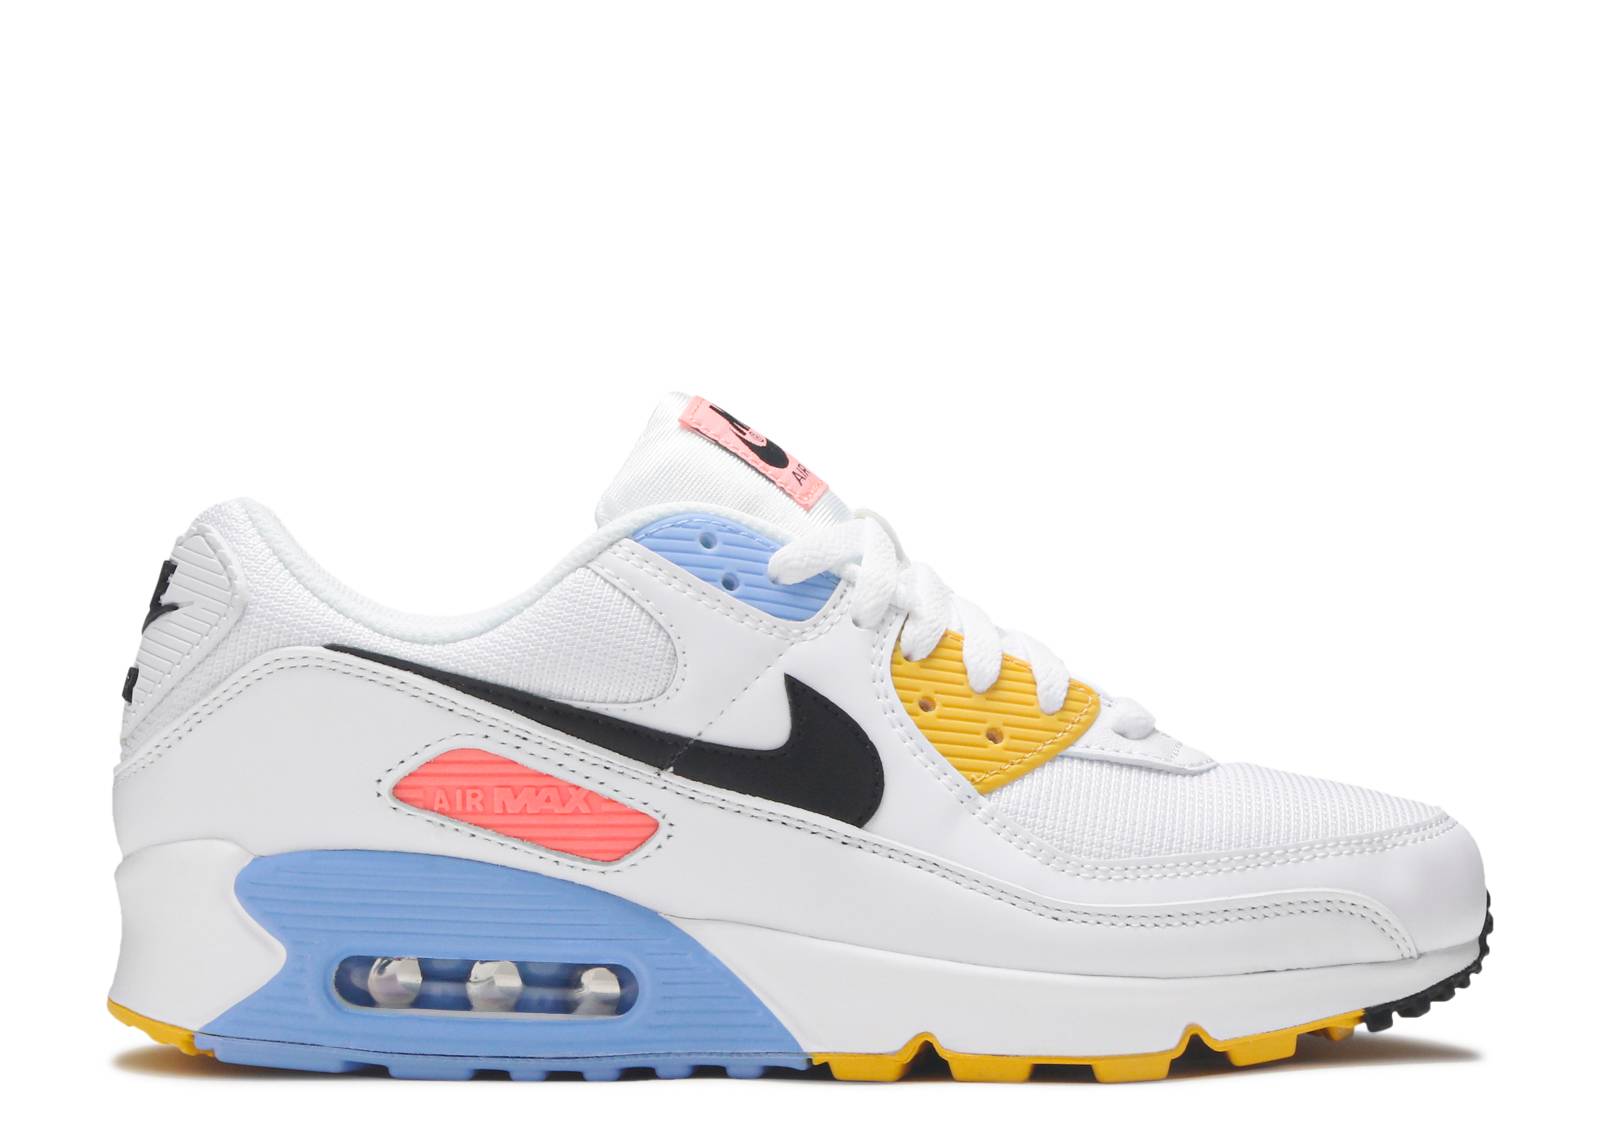 Wmns Air Max 90 'Solar Flare'Color:White,Size:5